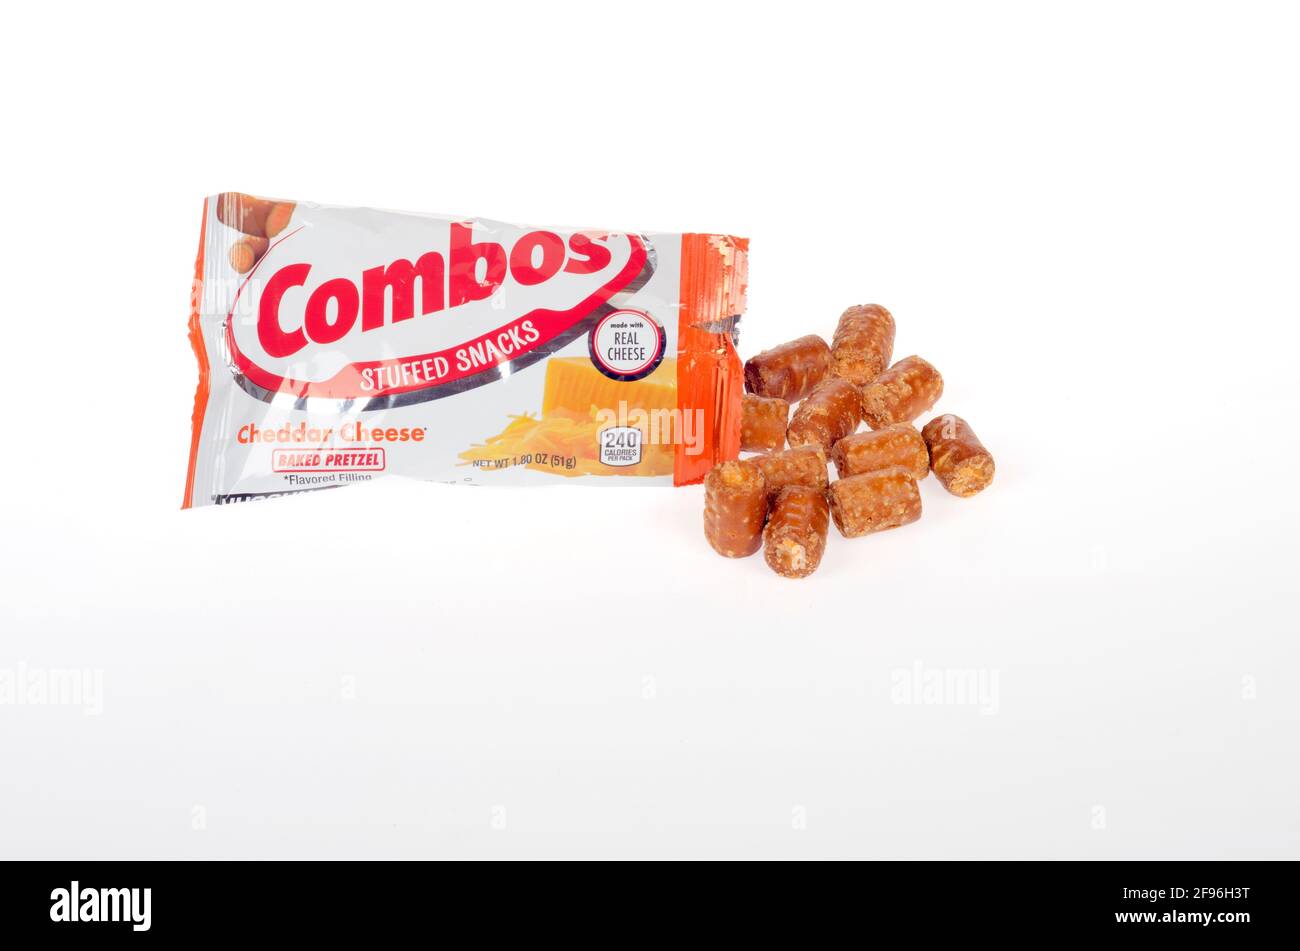 Combos Cheddar Cheese Stuffed Snacks Bag on White by Mars, Inc. Stock Photo